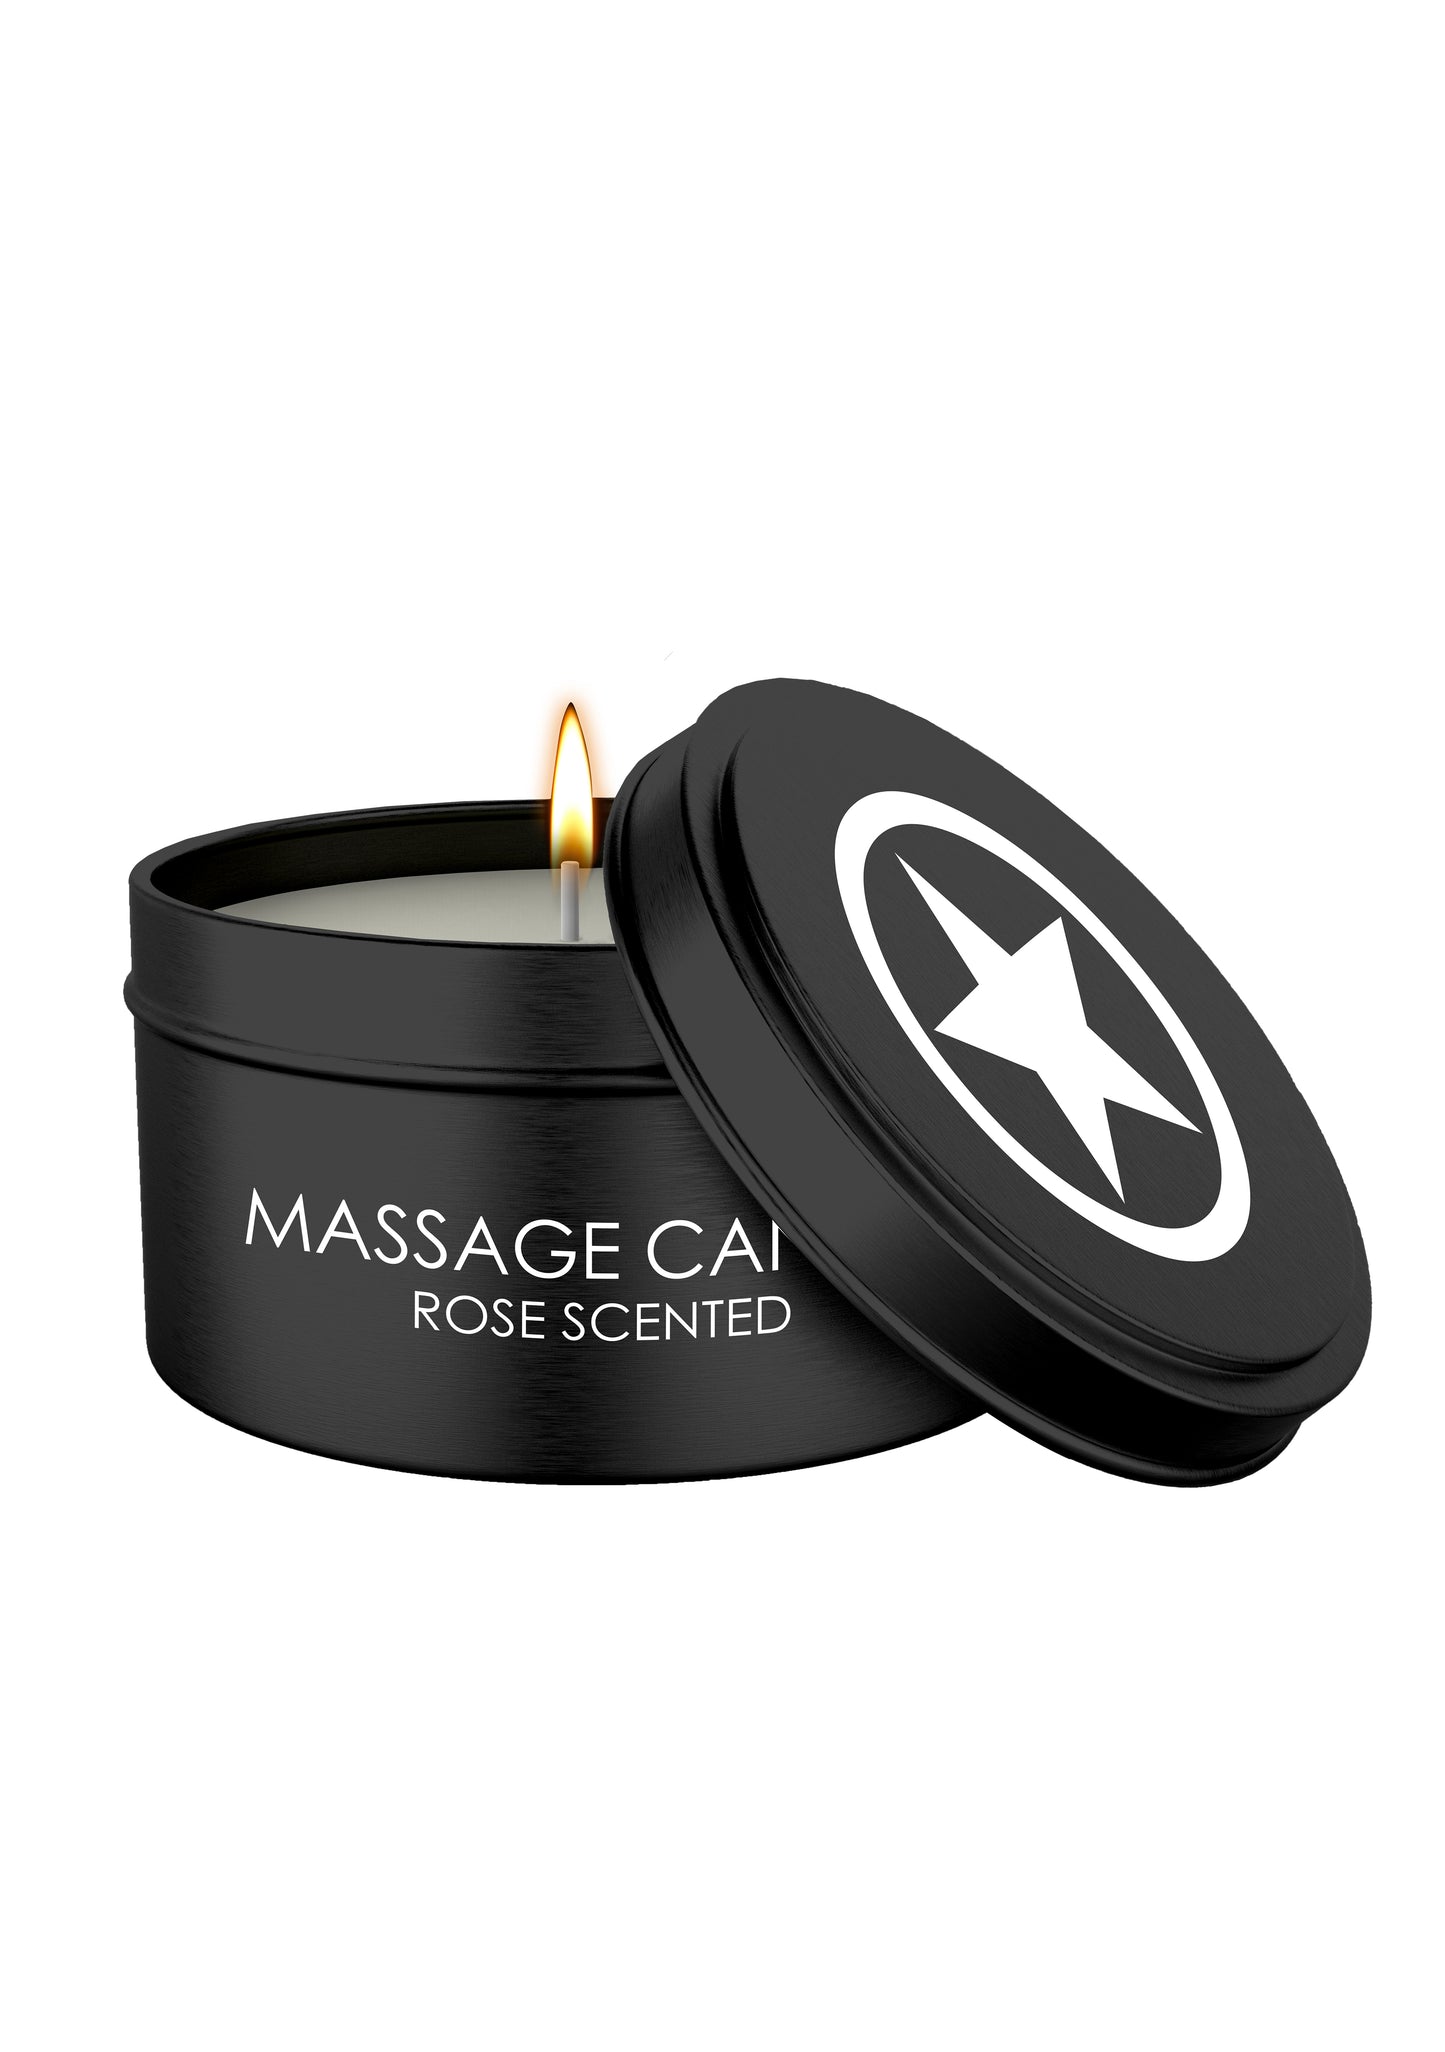 Massage Candle Rose Scented